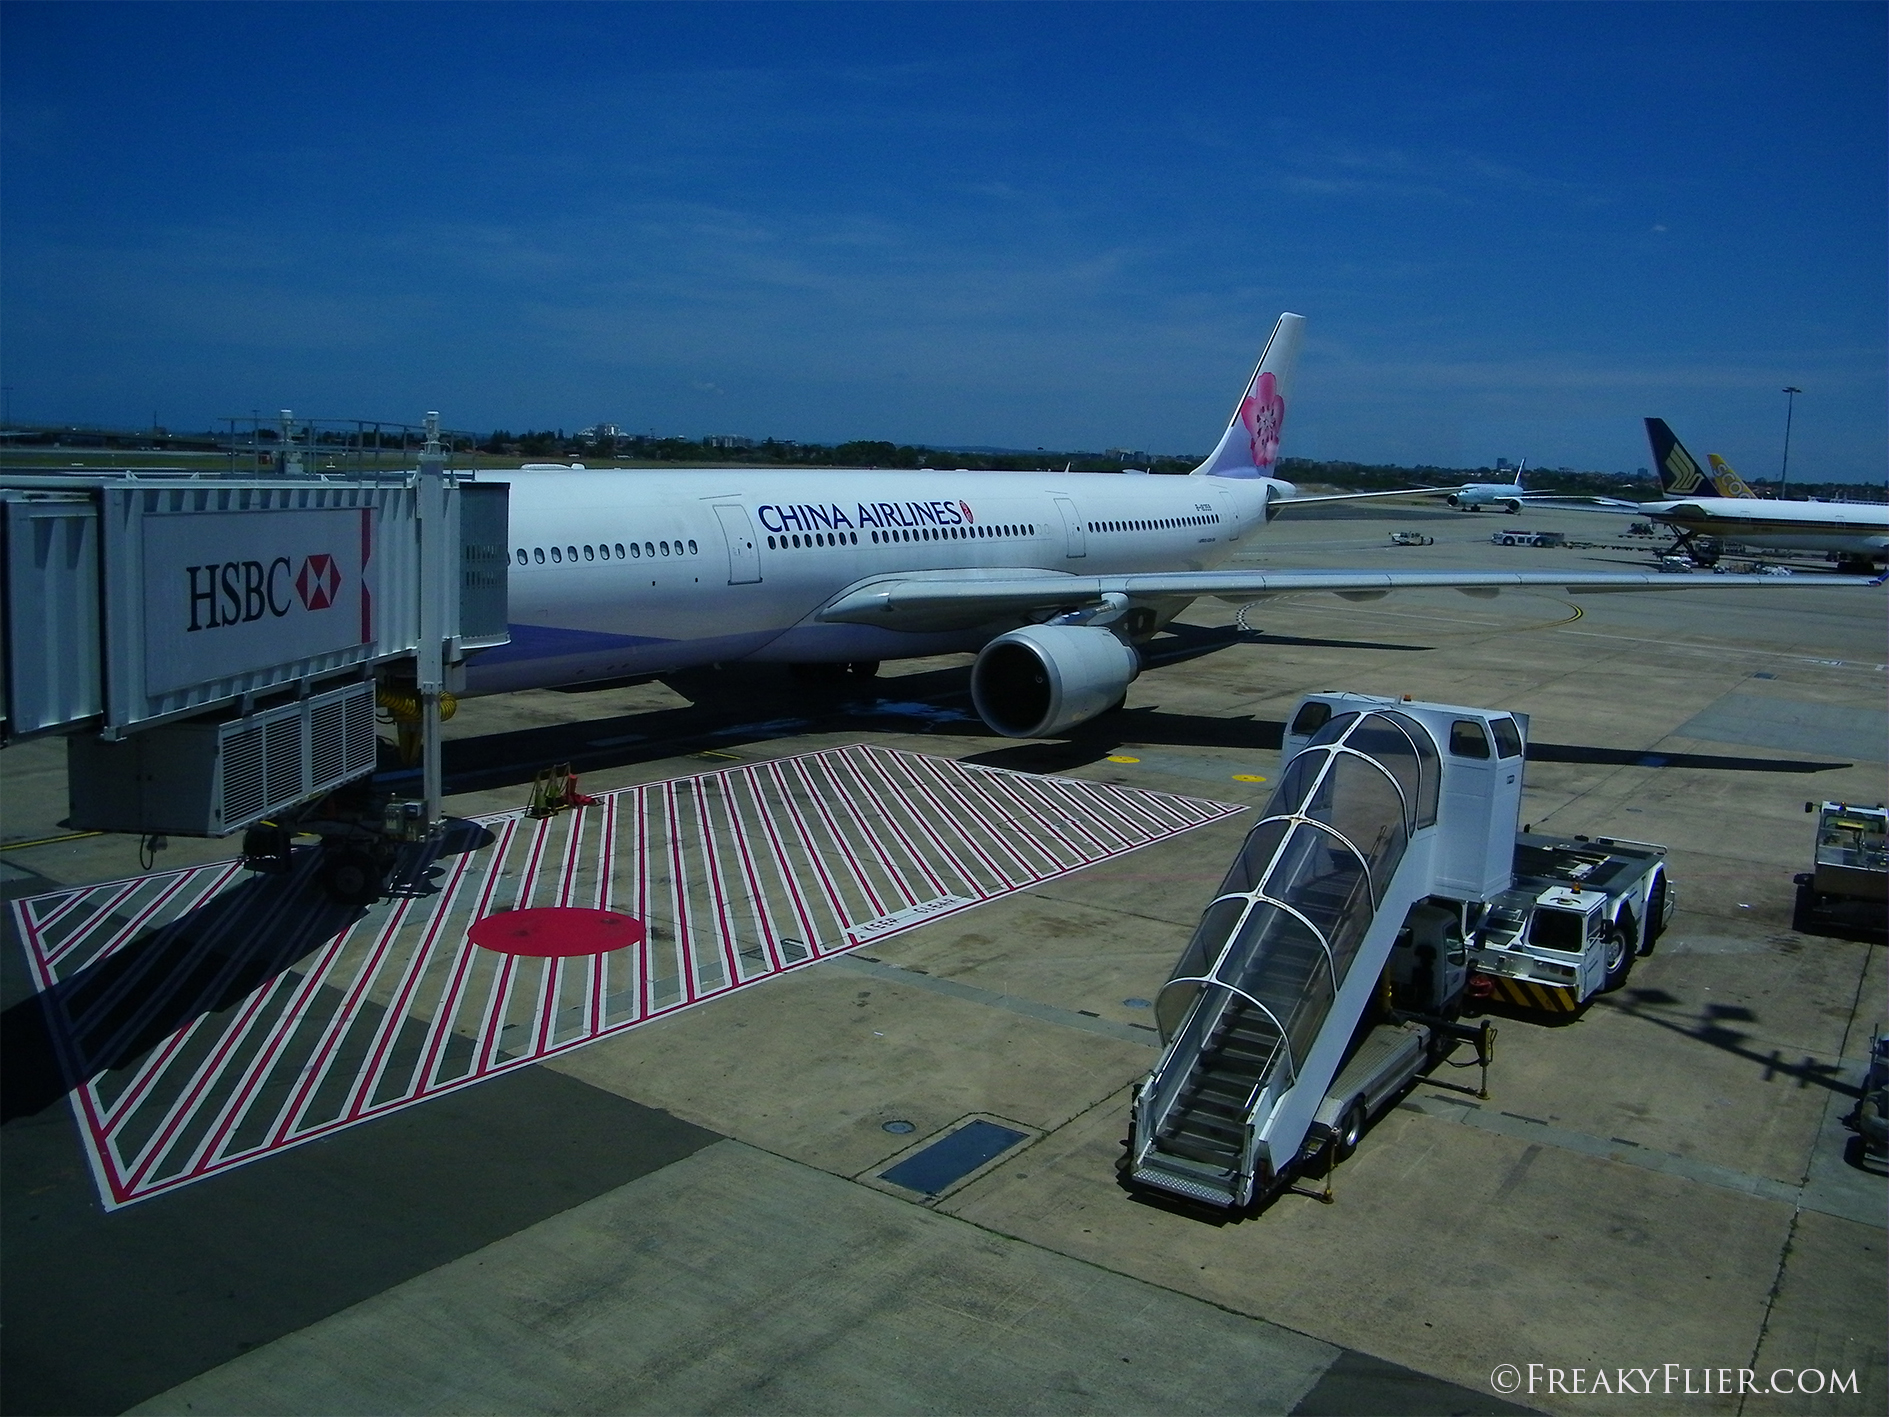 china airlines reviews brisbane to auckland